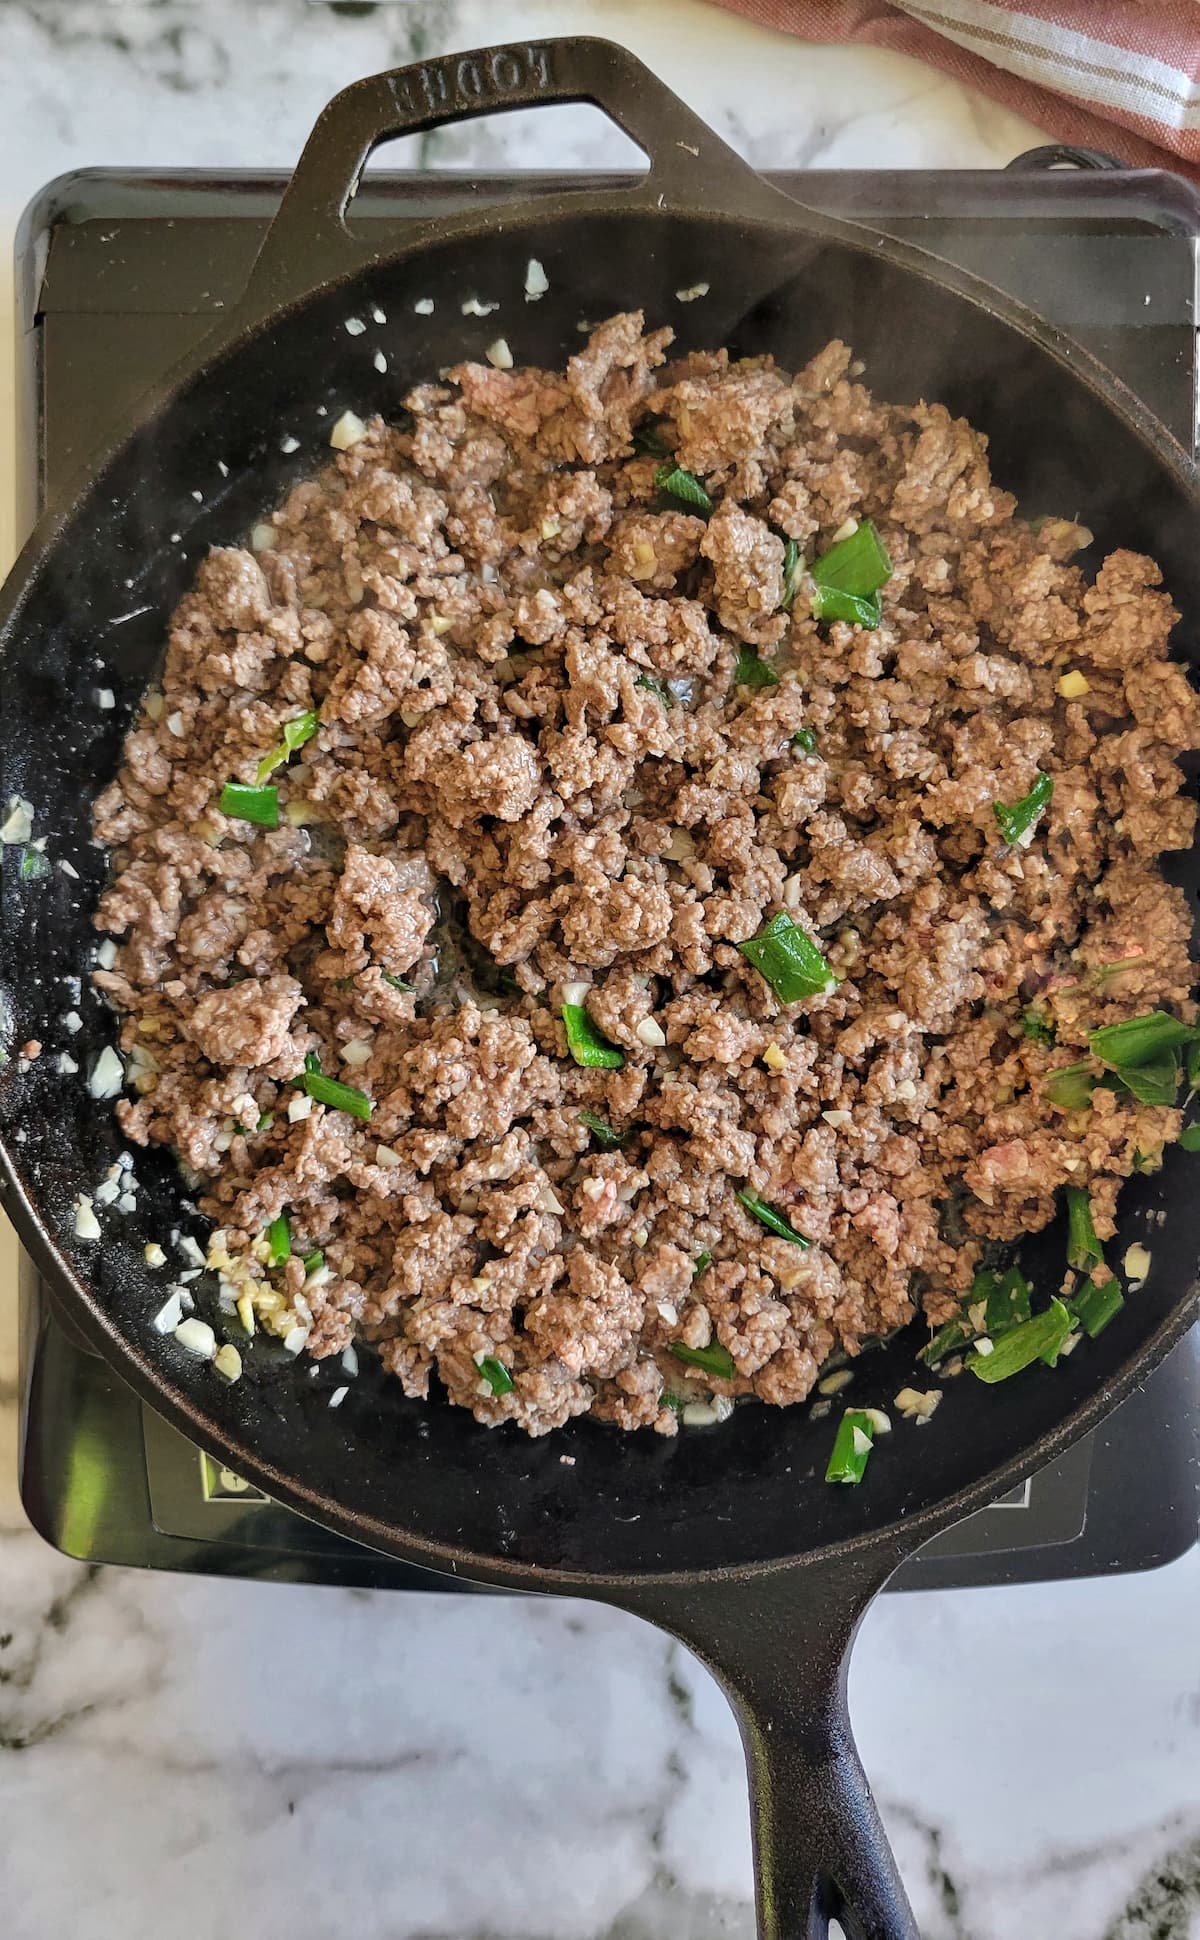 green onions, garlic and browned ground beef in a cast iron skillet on a burner